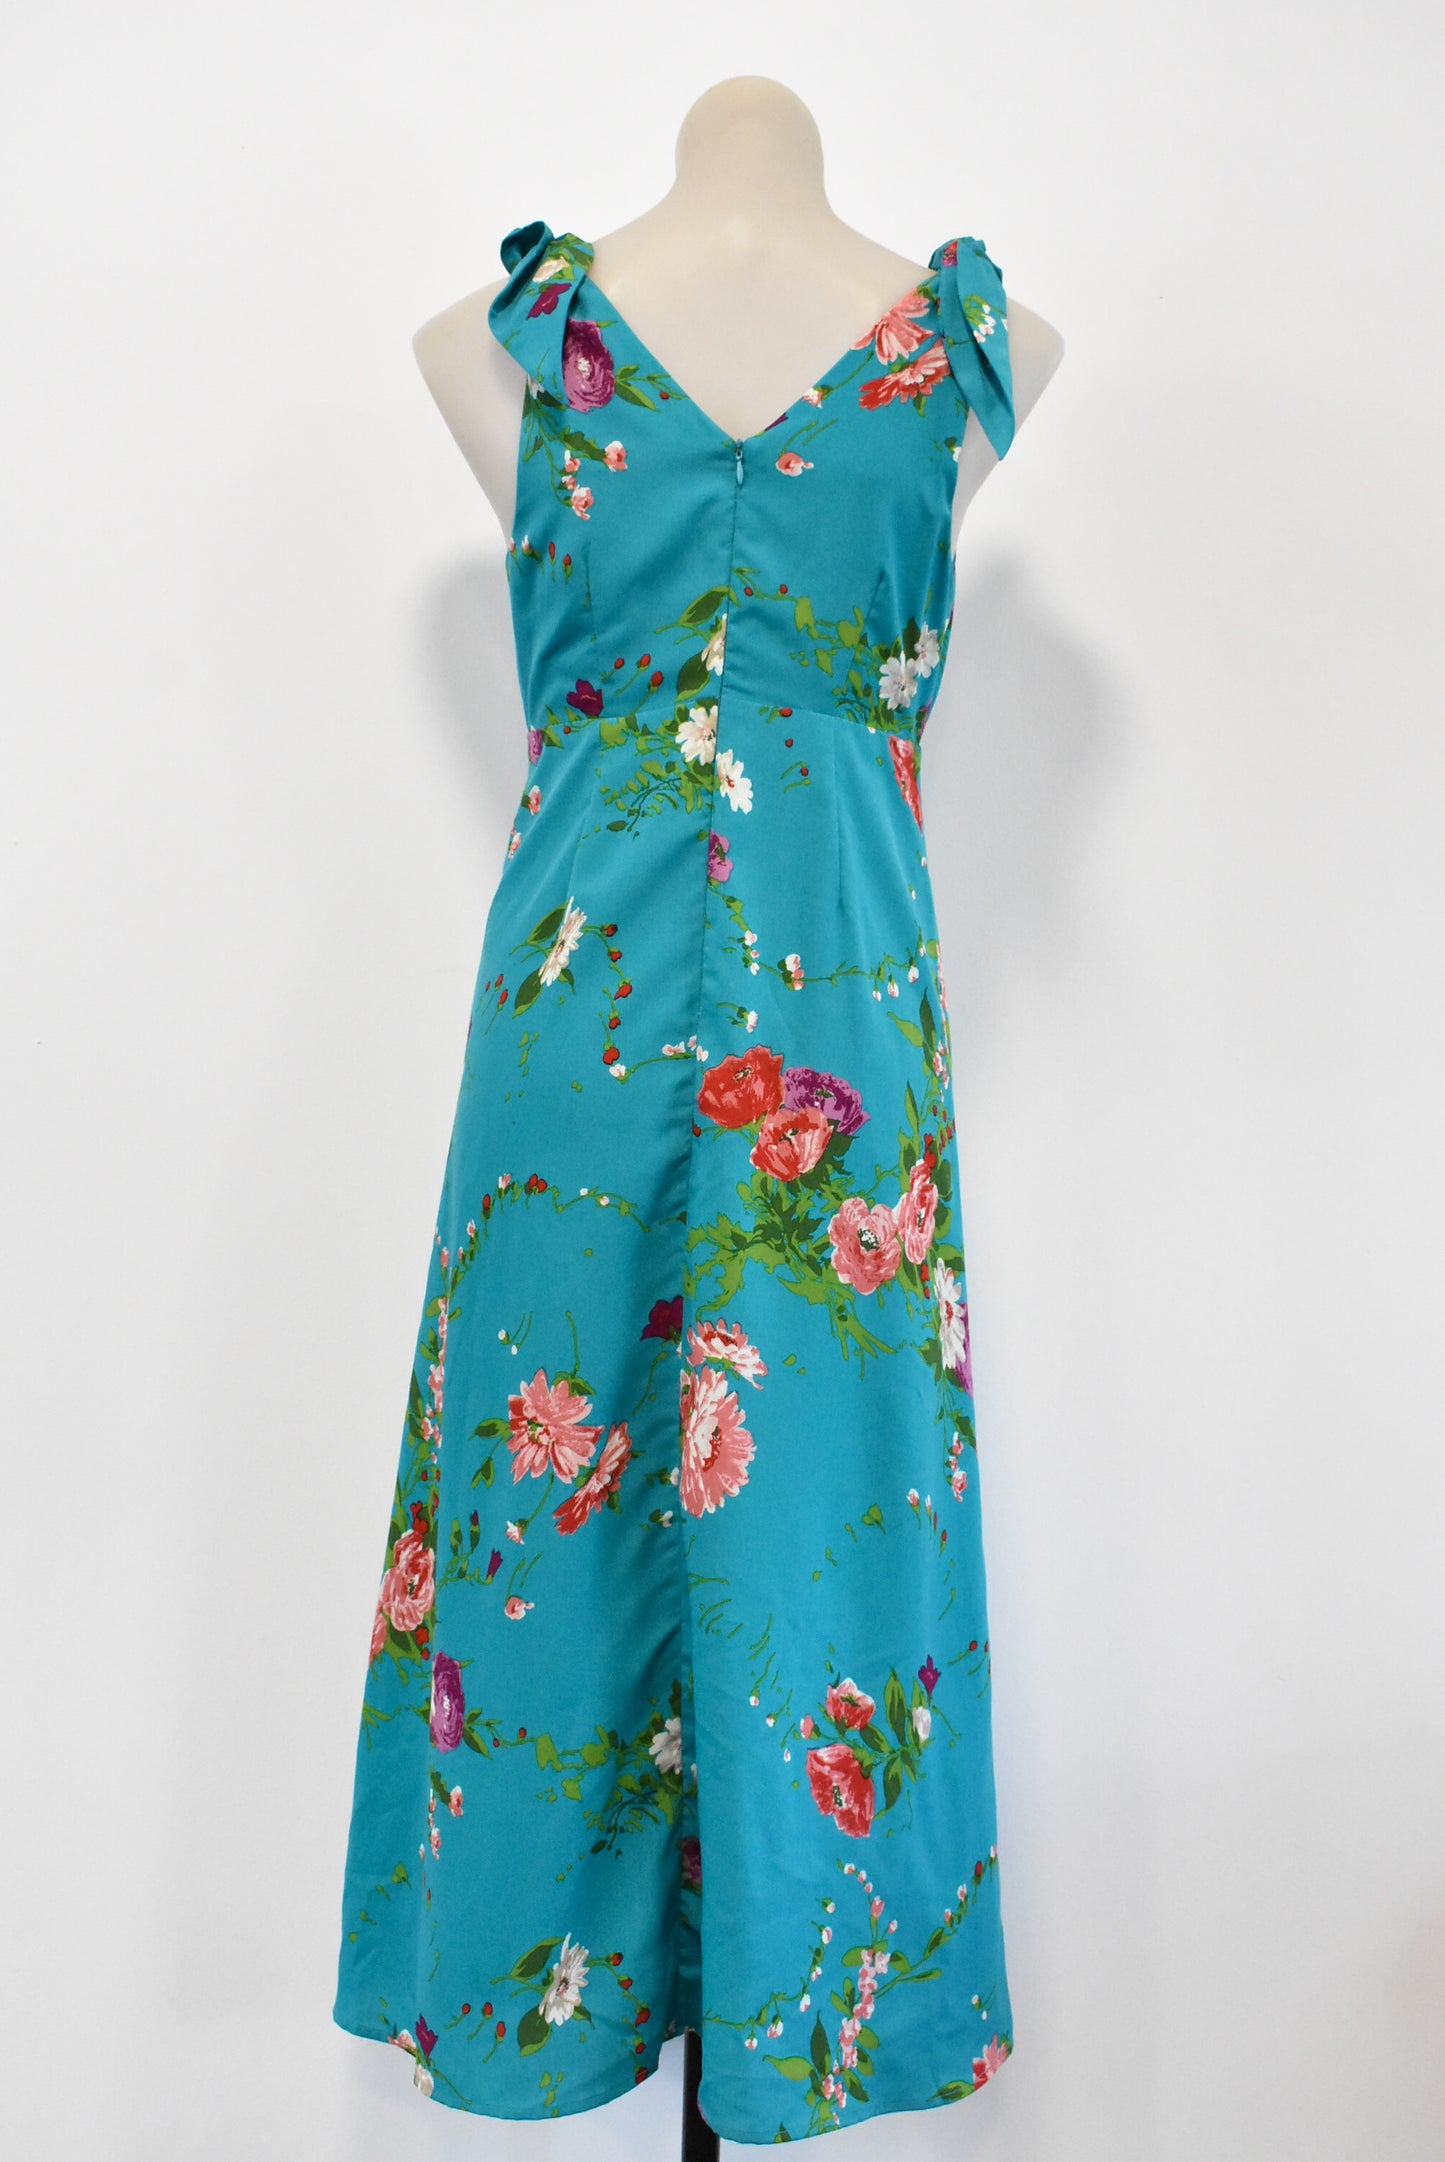 Whistle teal floral dress, 8